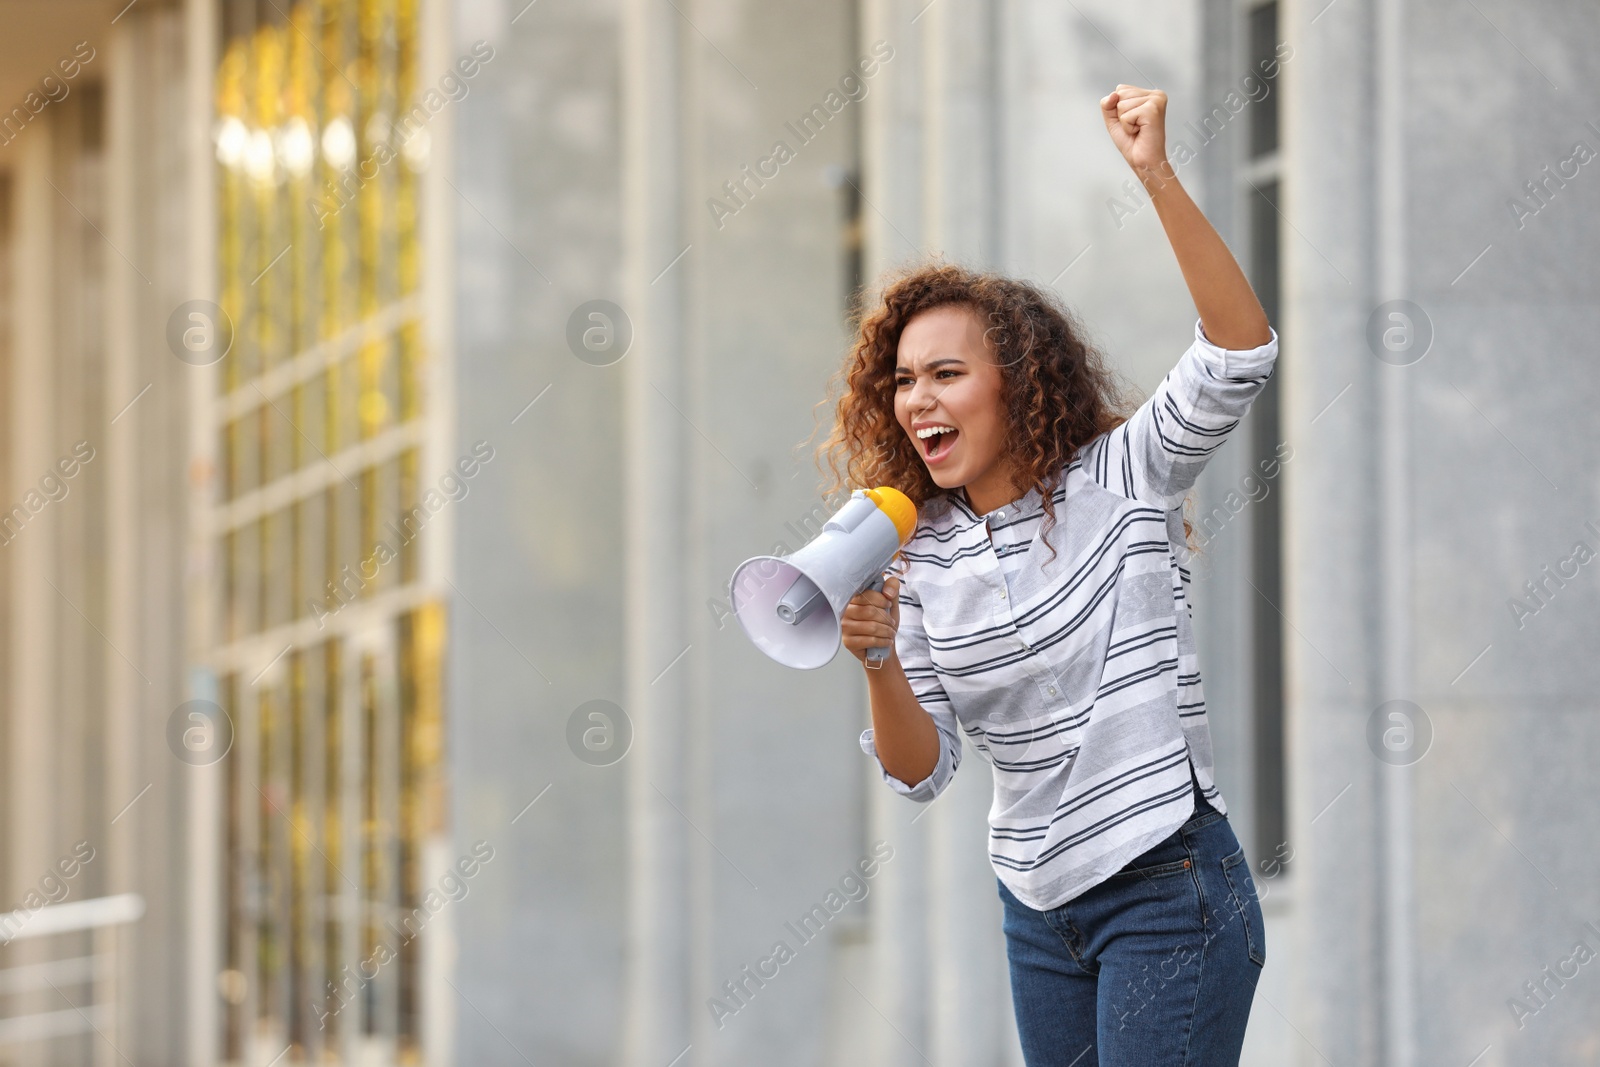 Image of Emotional African American young woman with megaphone outdoors. Protest leader